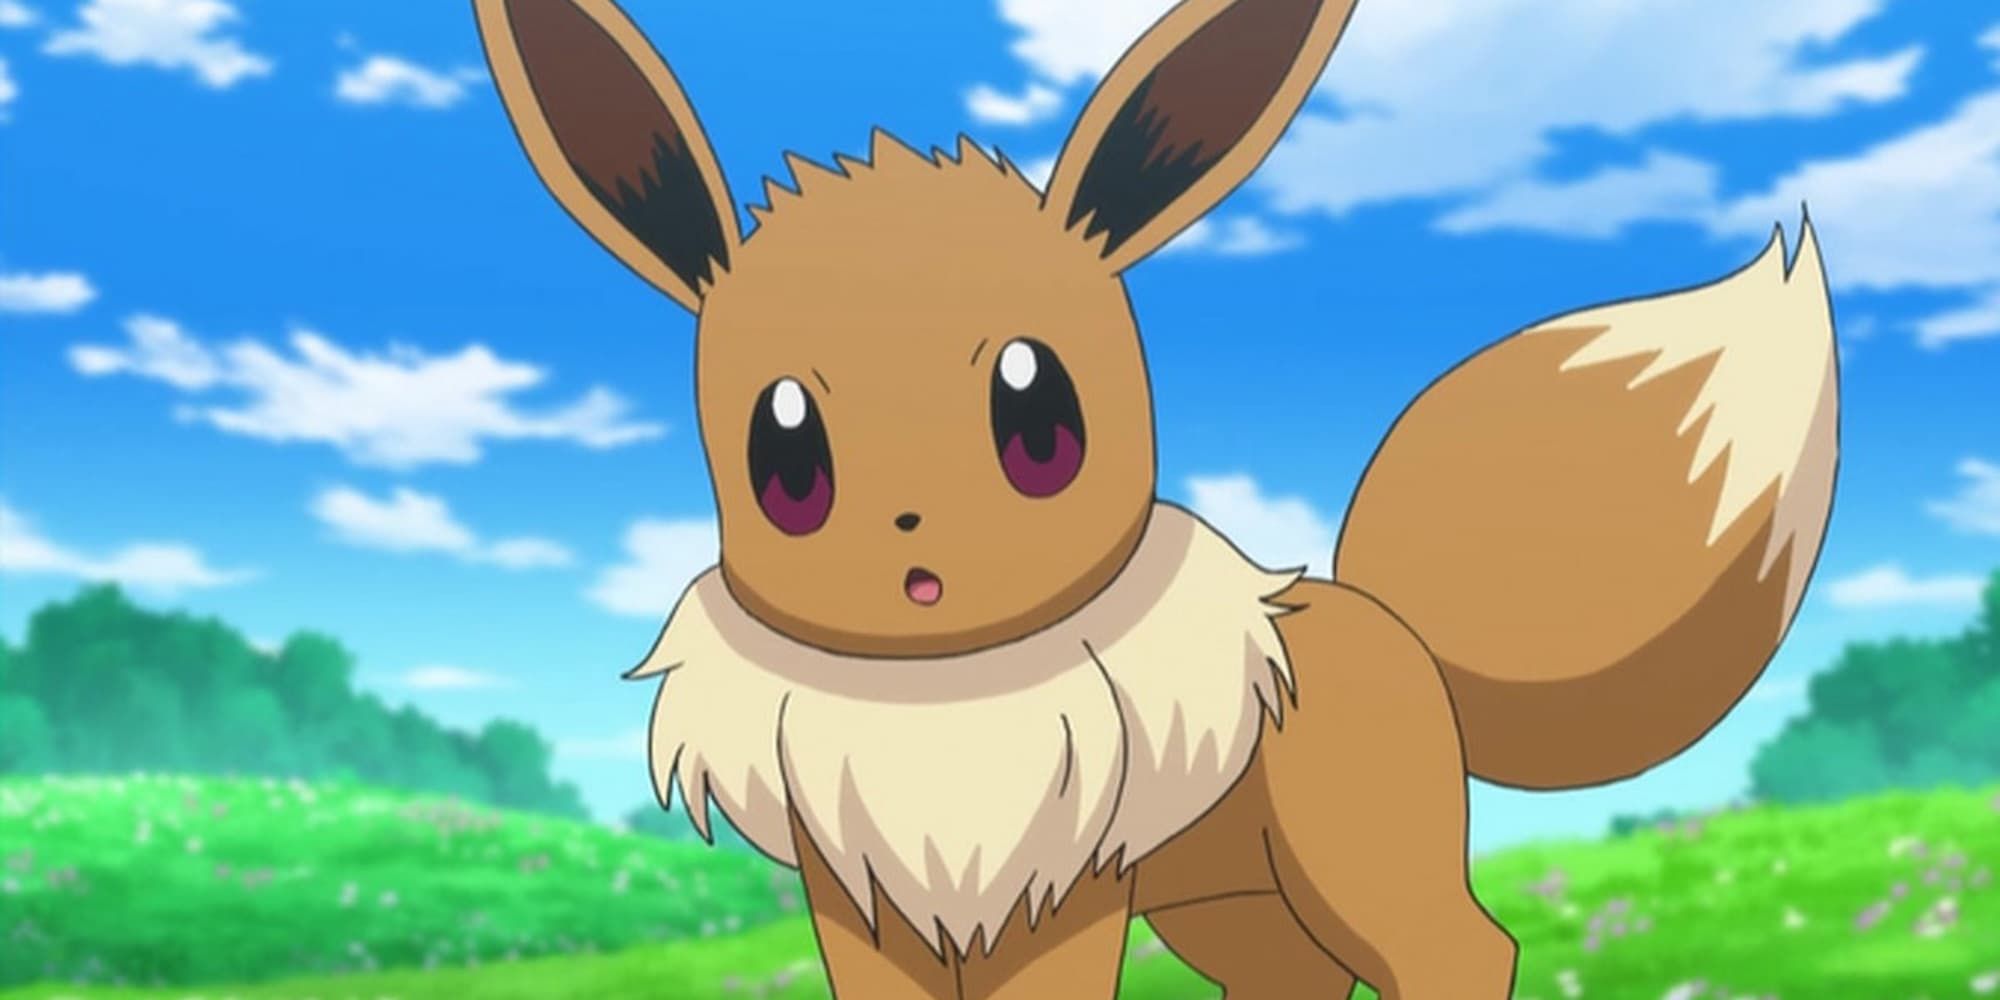 Eevee looks ahead with a quizzical expression.